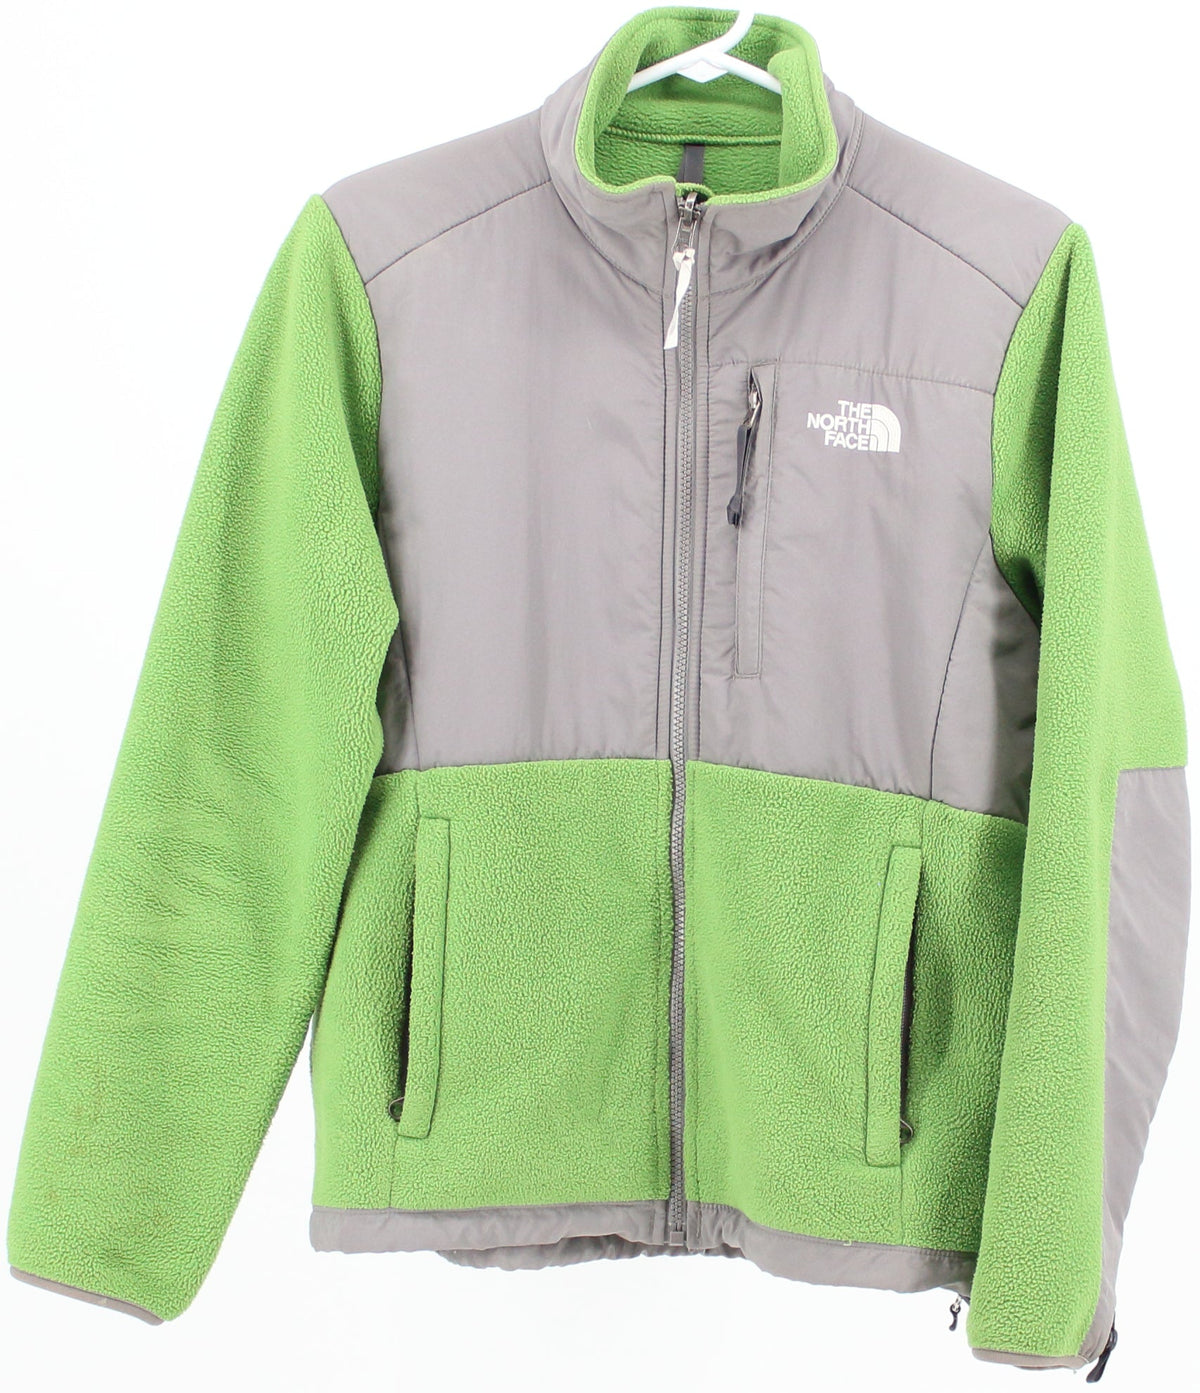 The North Face Women's Apple Green and Grey Fleece and Nylon Jacket